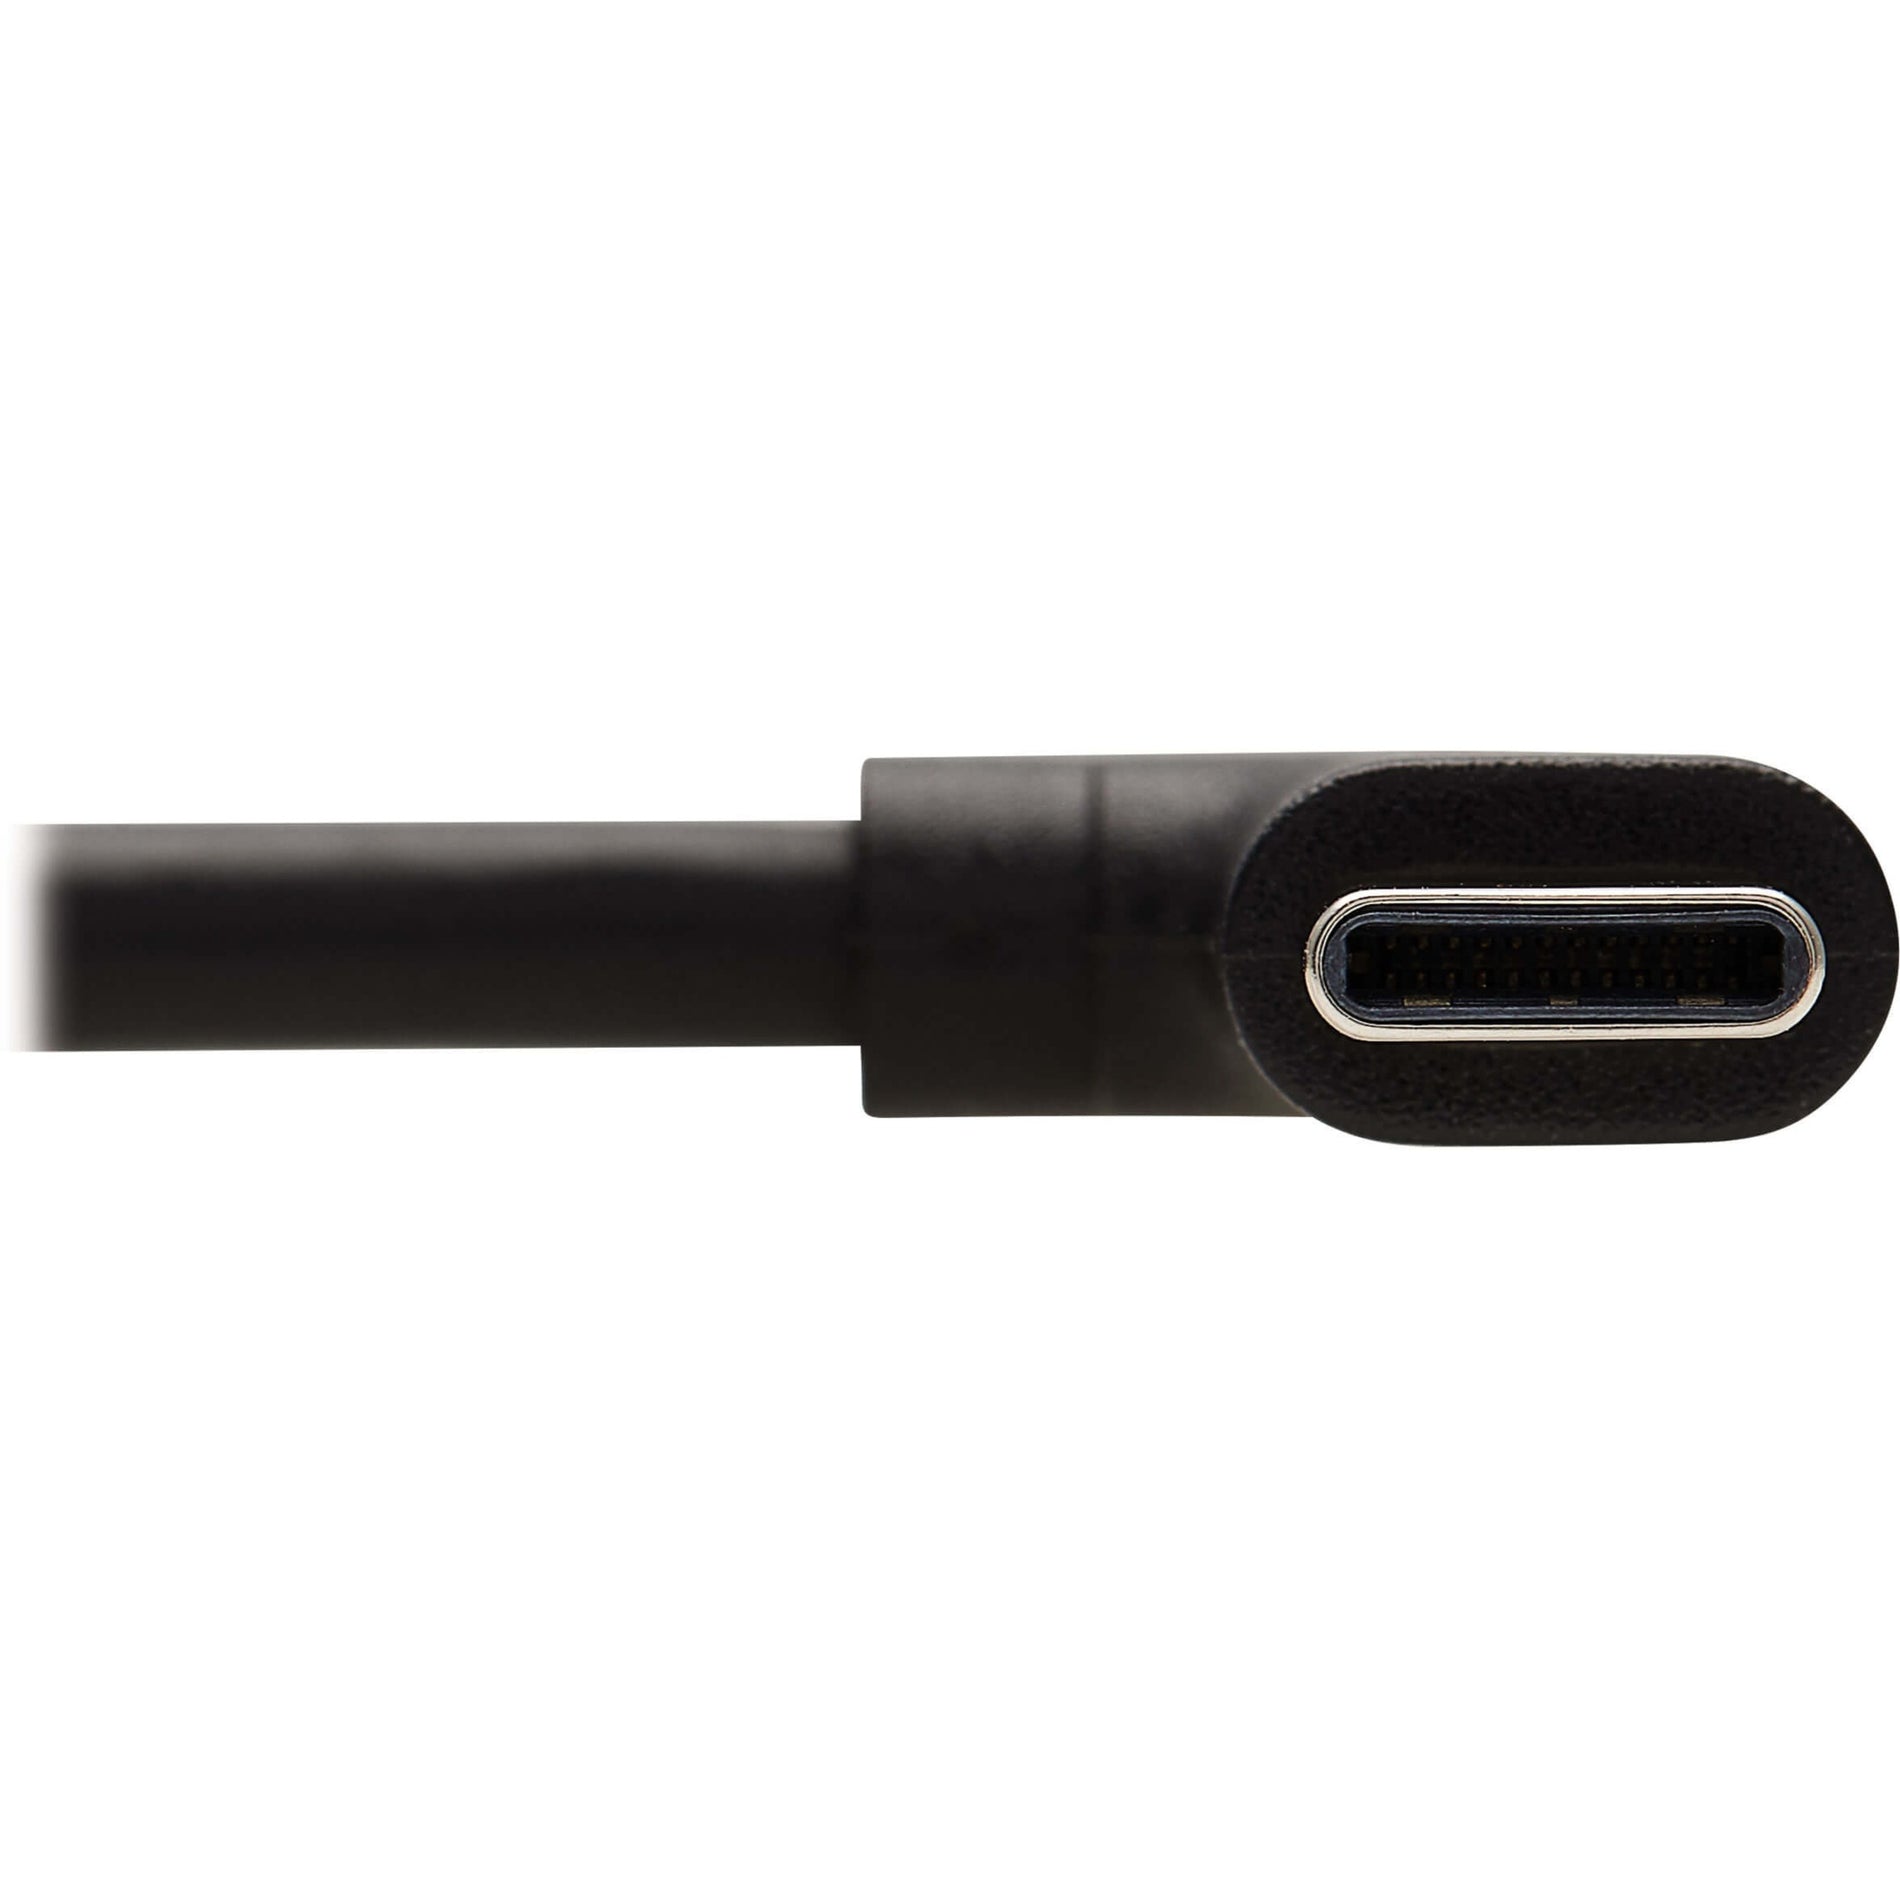 Tripp Lite U040-02M-C-5ARA USB-C to USB-C Cable, M/M, Black, 2m (6.6 ft.), Right-angled Connector, Reversible, USB-Power Delivery (USB PD), Charging, Strain Relief, Bend Resistant